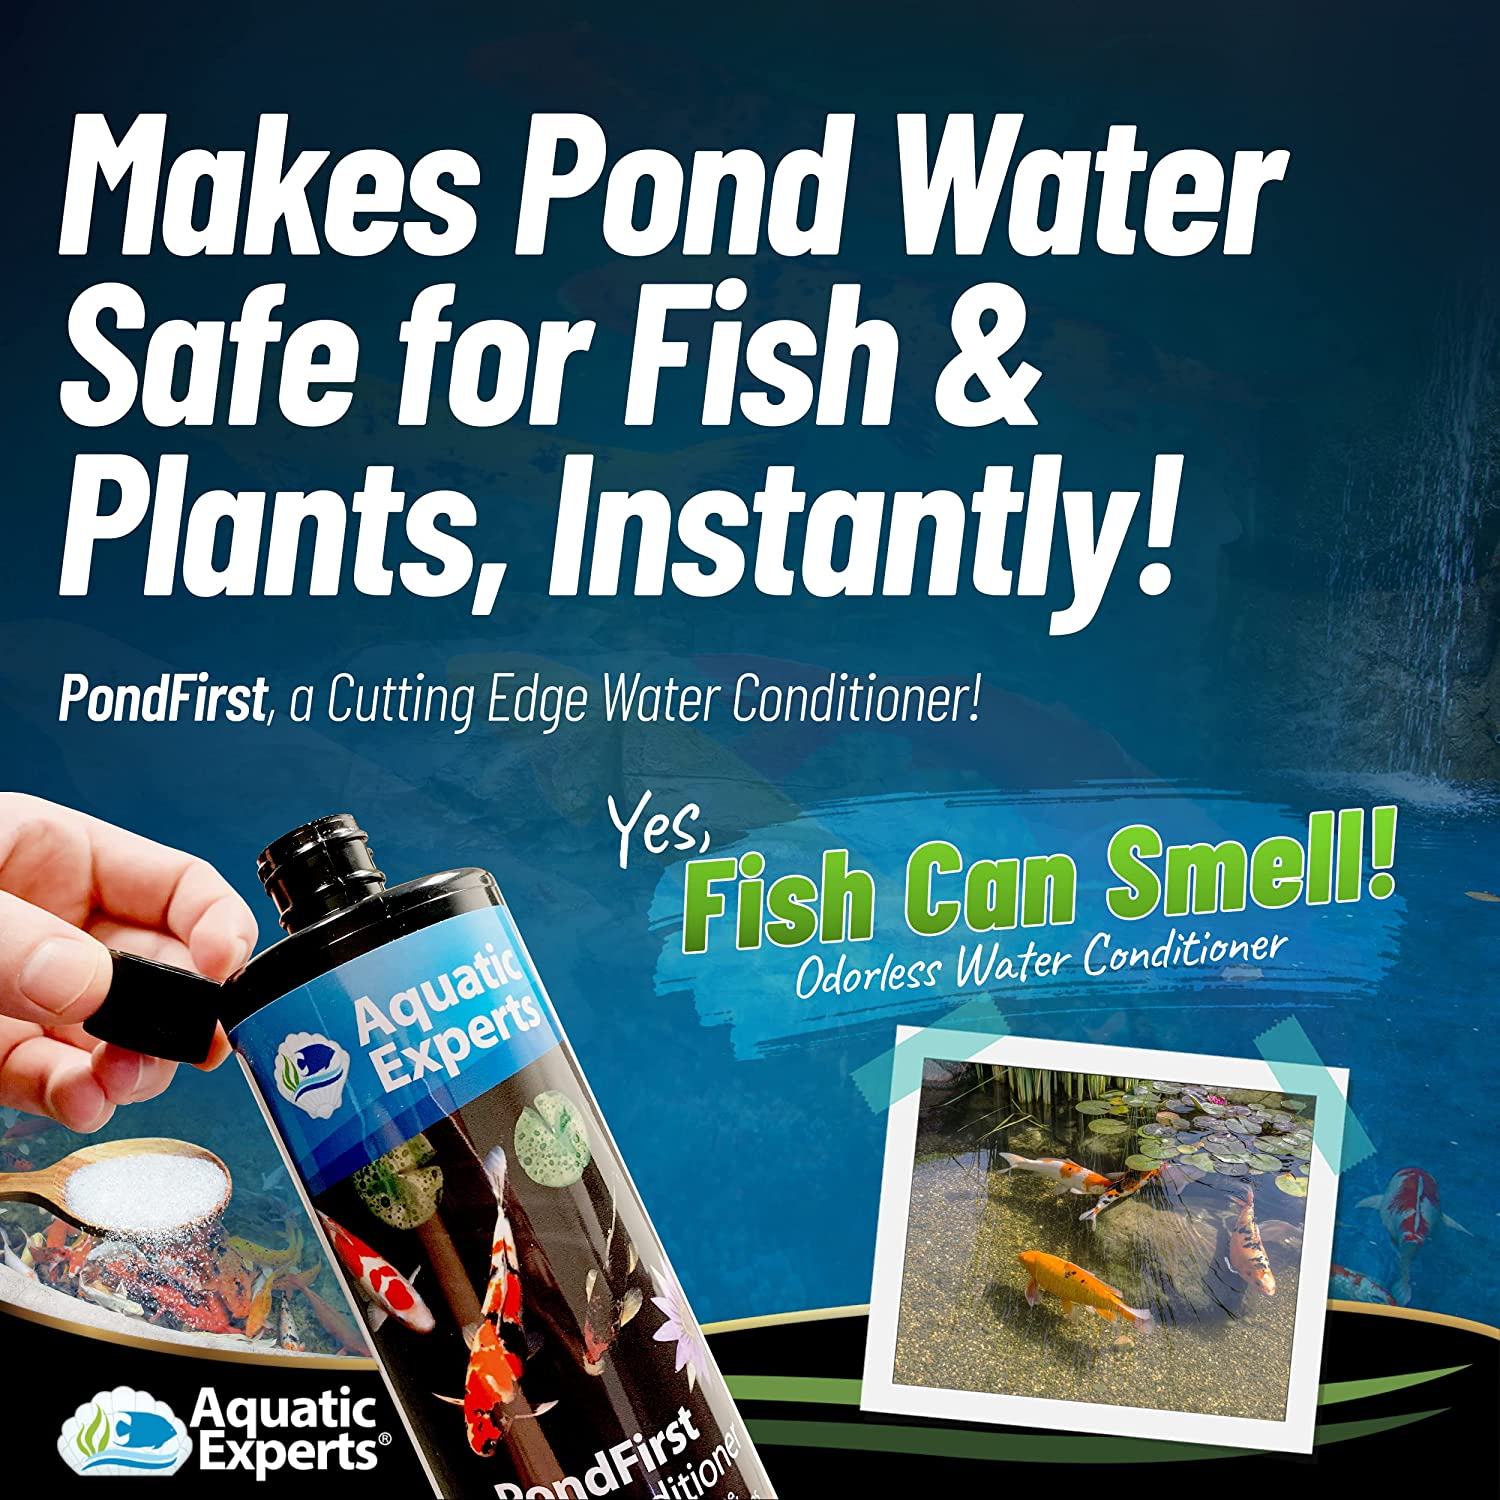 Pondfirst Pond Water Conditioner - Concentrated Instant Dechlorinator for Fish Ponds, Makes Water Safe for Koi and Goldfish, Made in the USA (1 Pack)